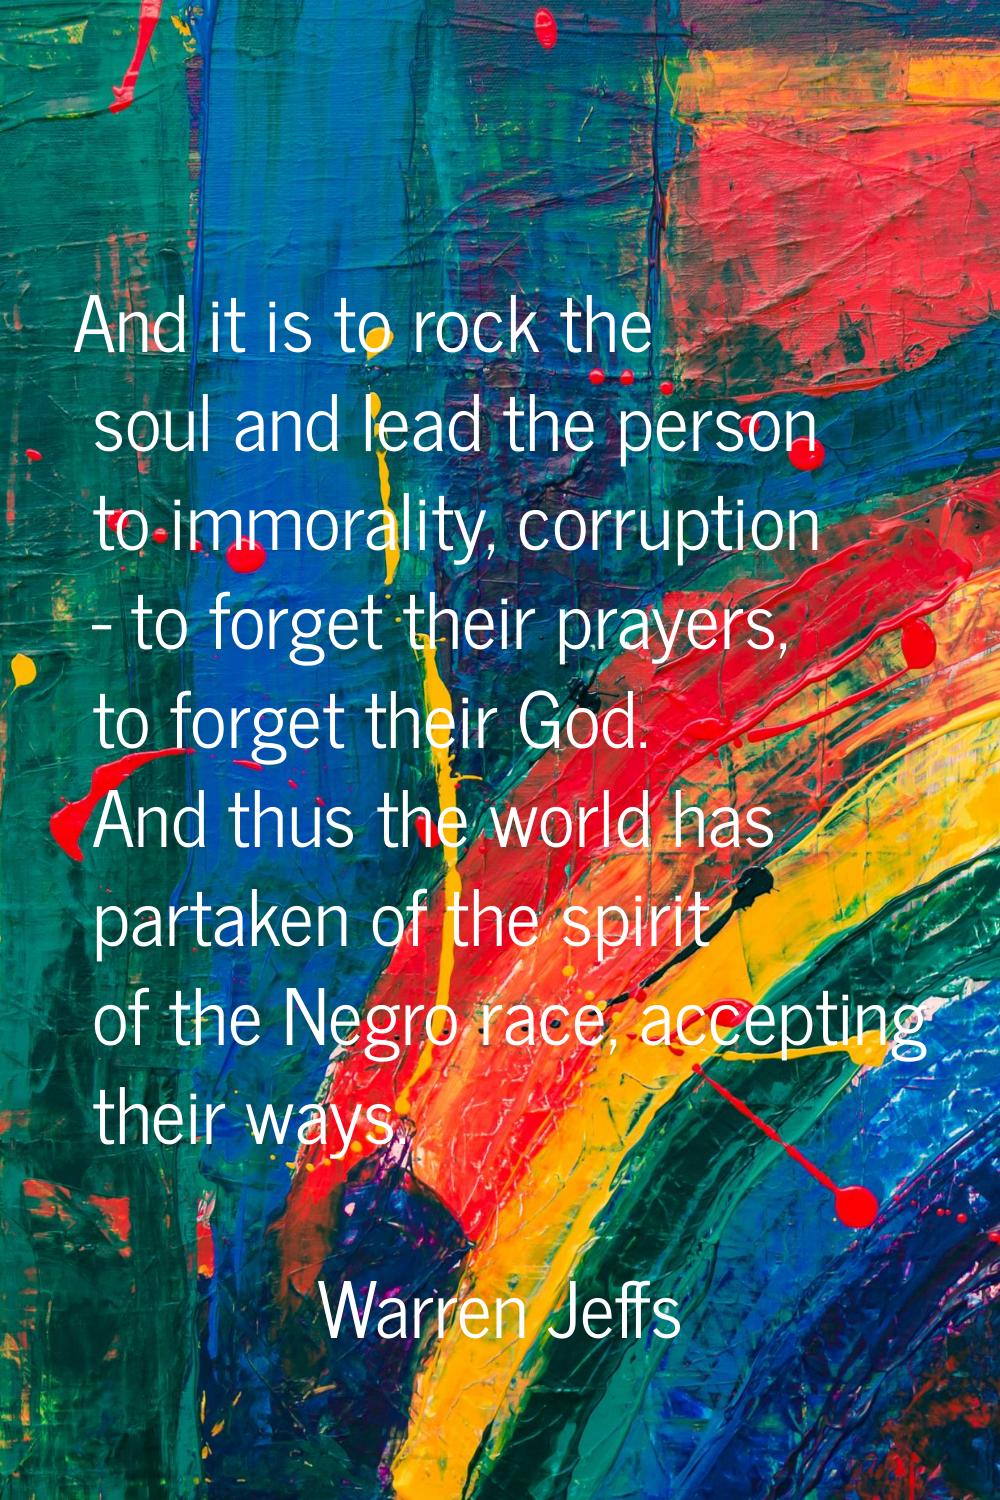 And it is to rock the soul and lead the person to immorality, corruption - to forget their prayers,